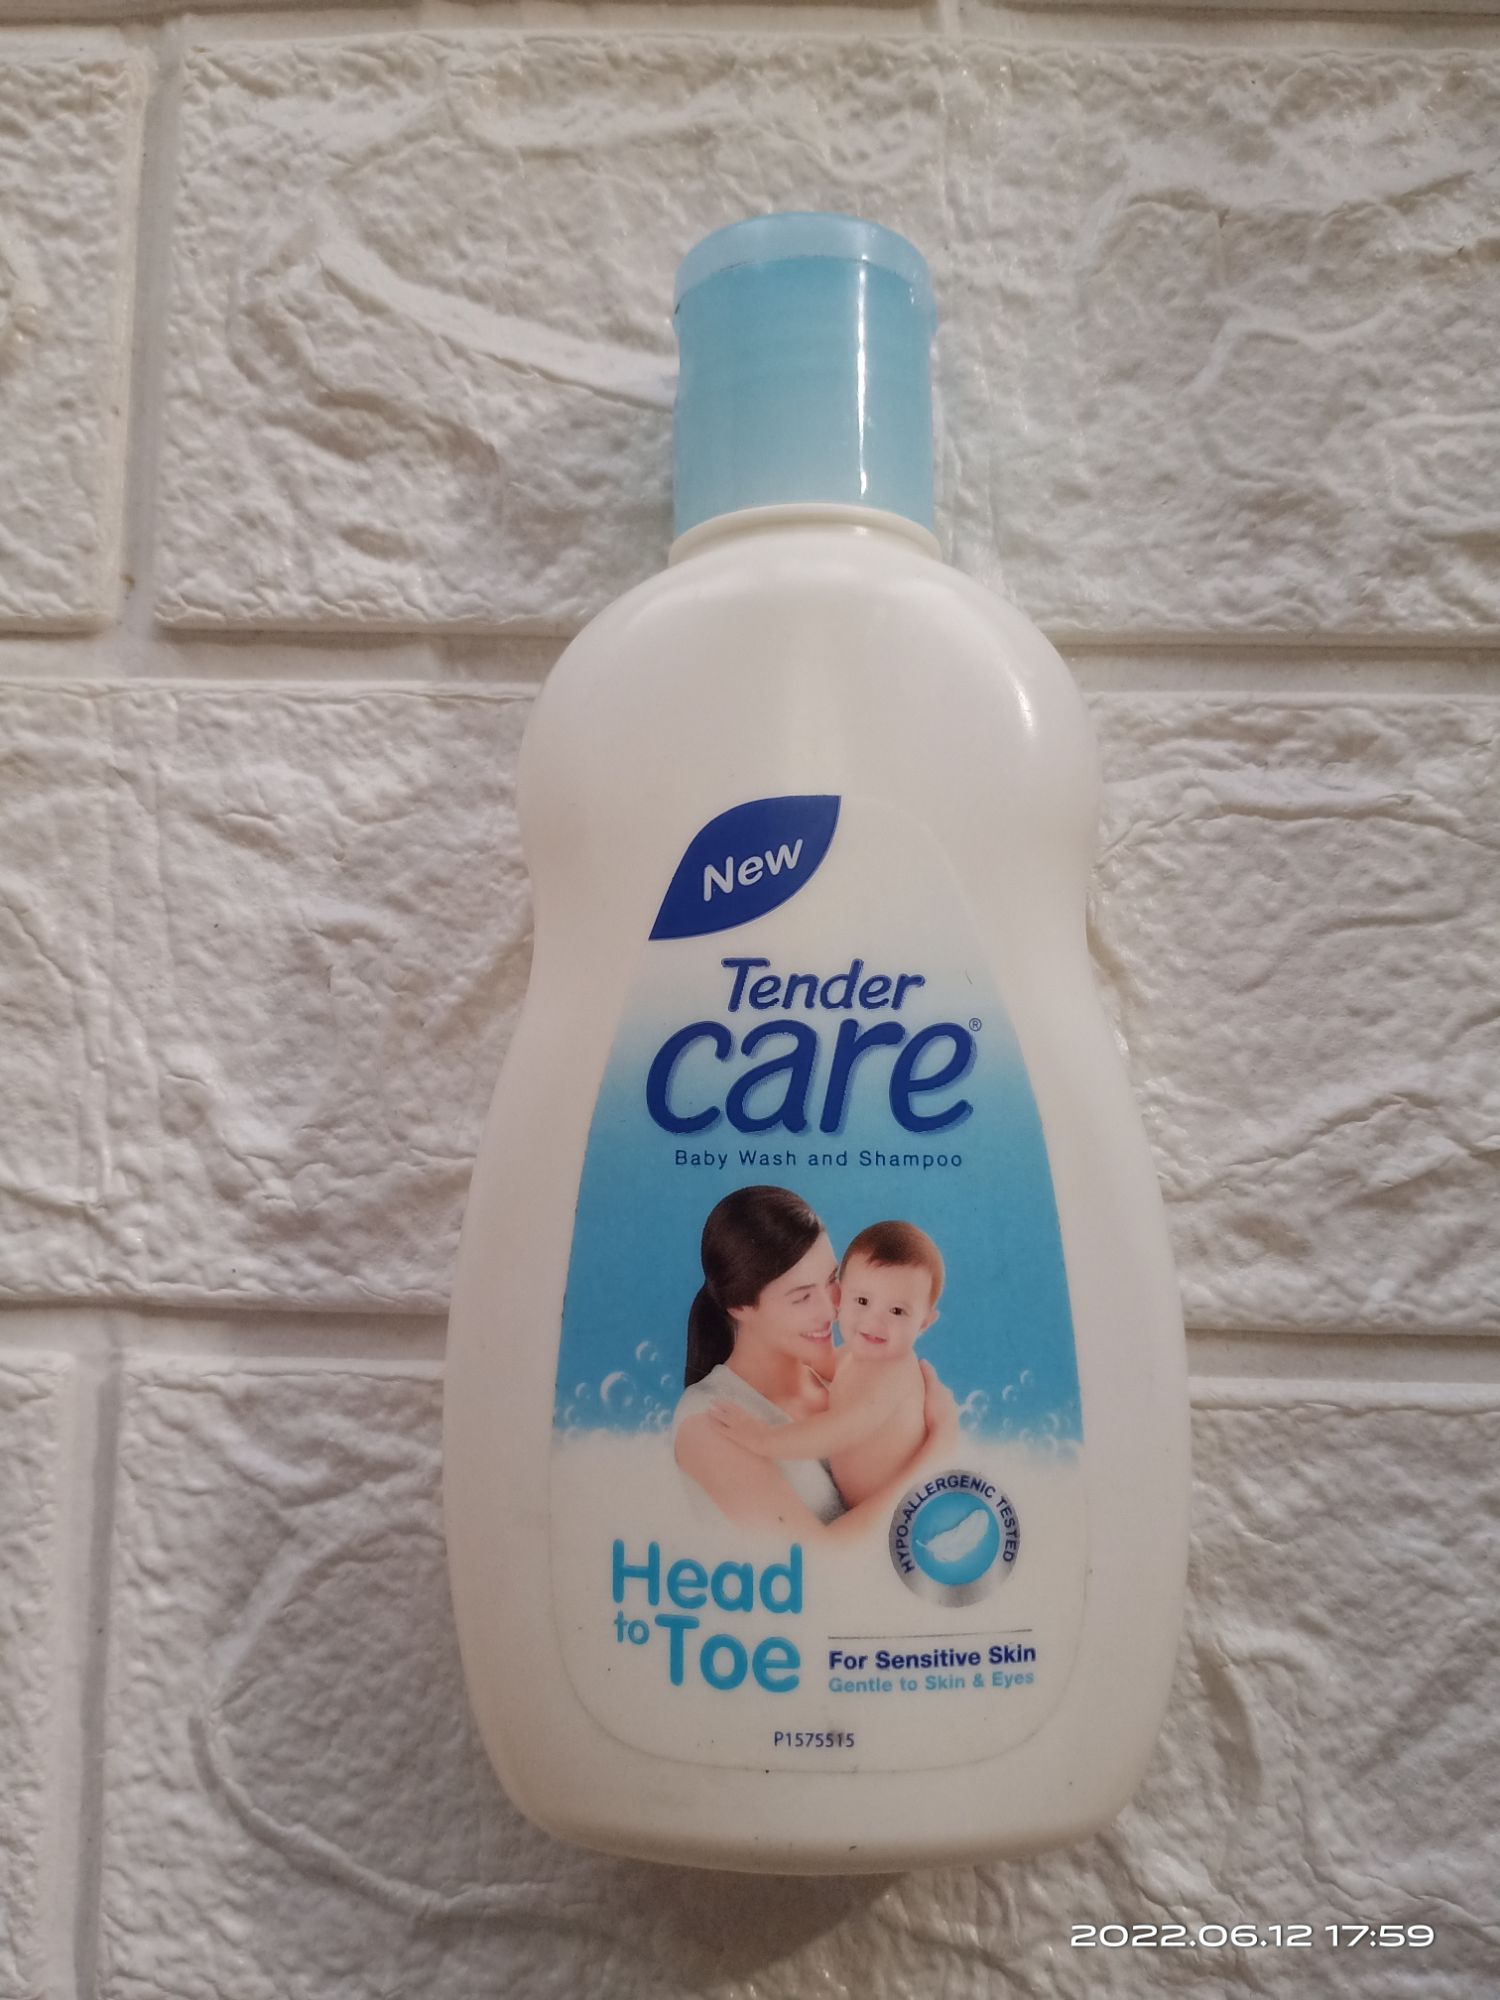 Baby wash and shampoo head to toe by Tender care : review - Baby care